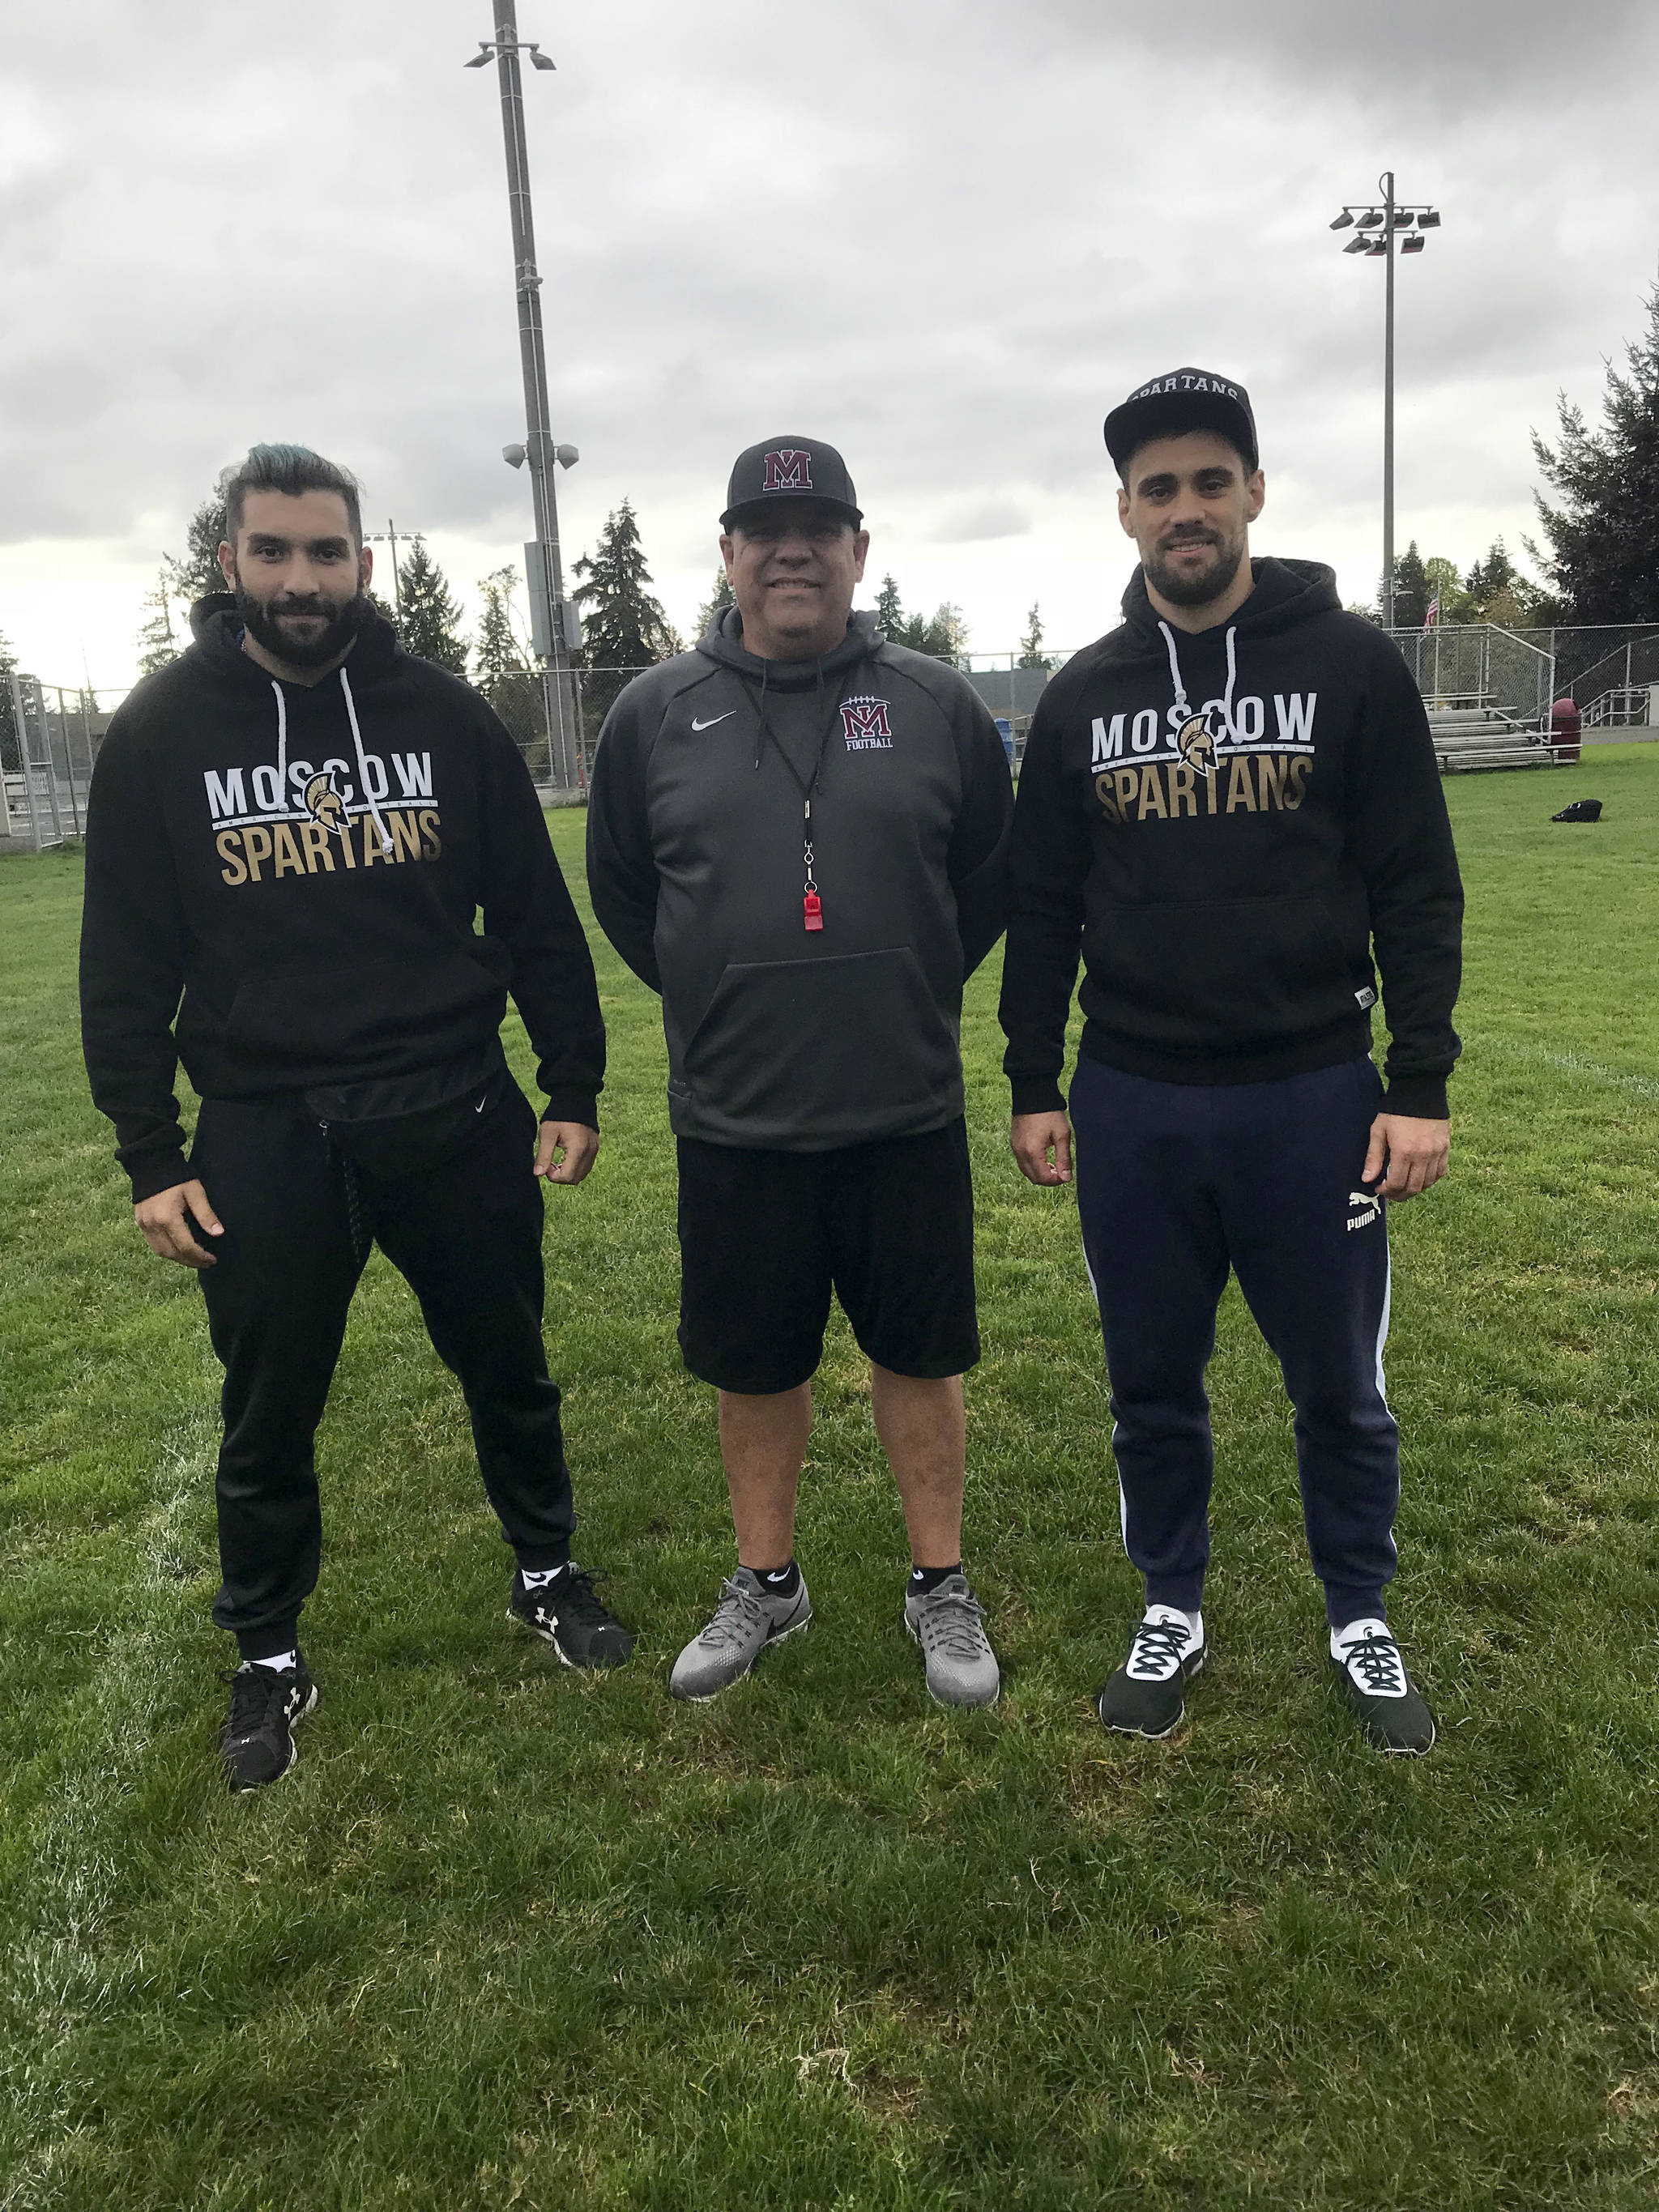 Moscow Spartans football players Omari Grinyaev, Michael Levenshtein and Mercer Island head football coach Ed Slezinger pose for a quick photo prior to the start of Mercer Island’s football practice on Oct. 9. Grinyaev and Levenshtein will be in Washington observing the Islanders football programs practices, meetings, workouts and games through Oct. 22. Shaun Scott/staff photo